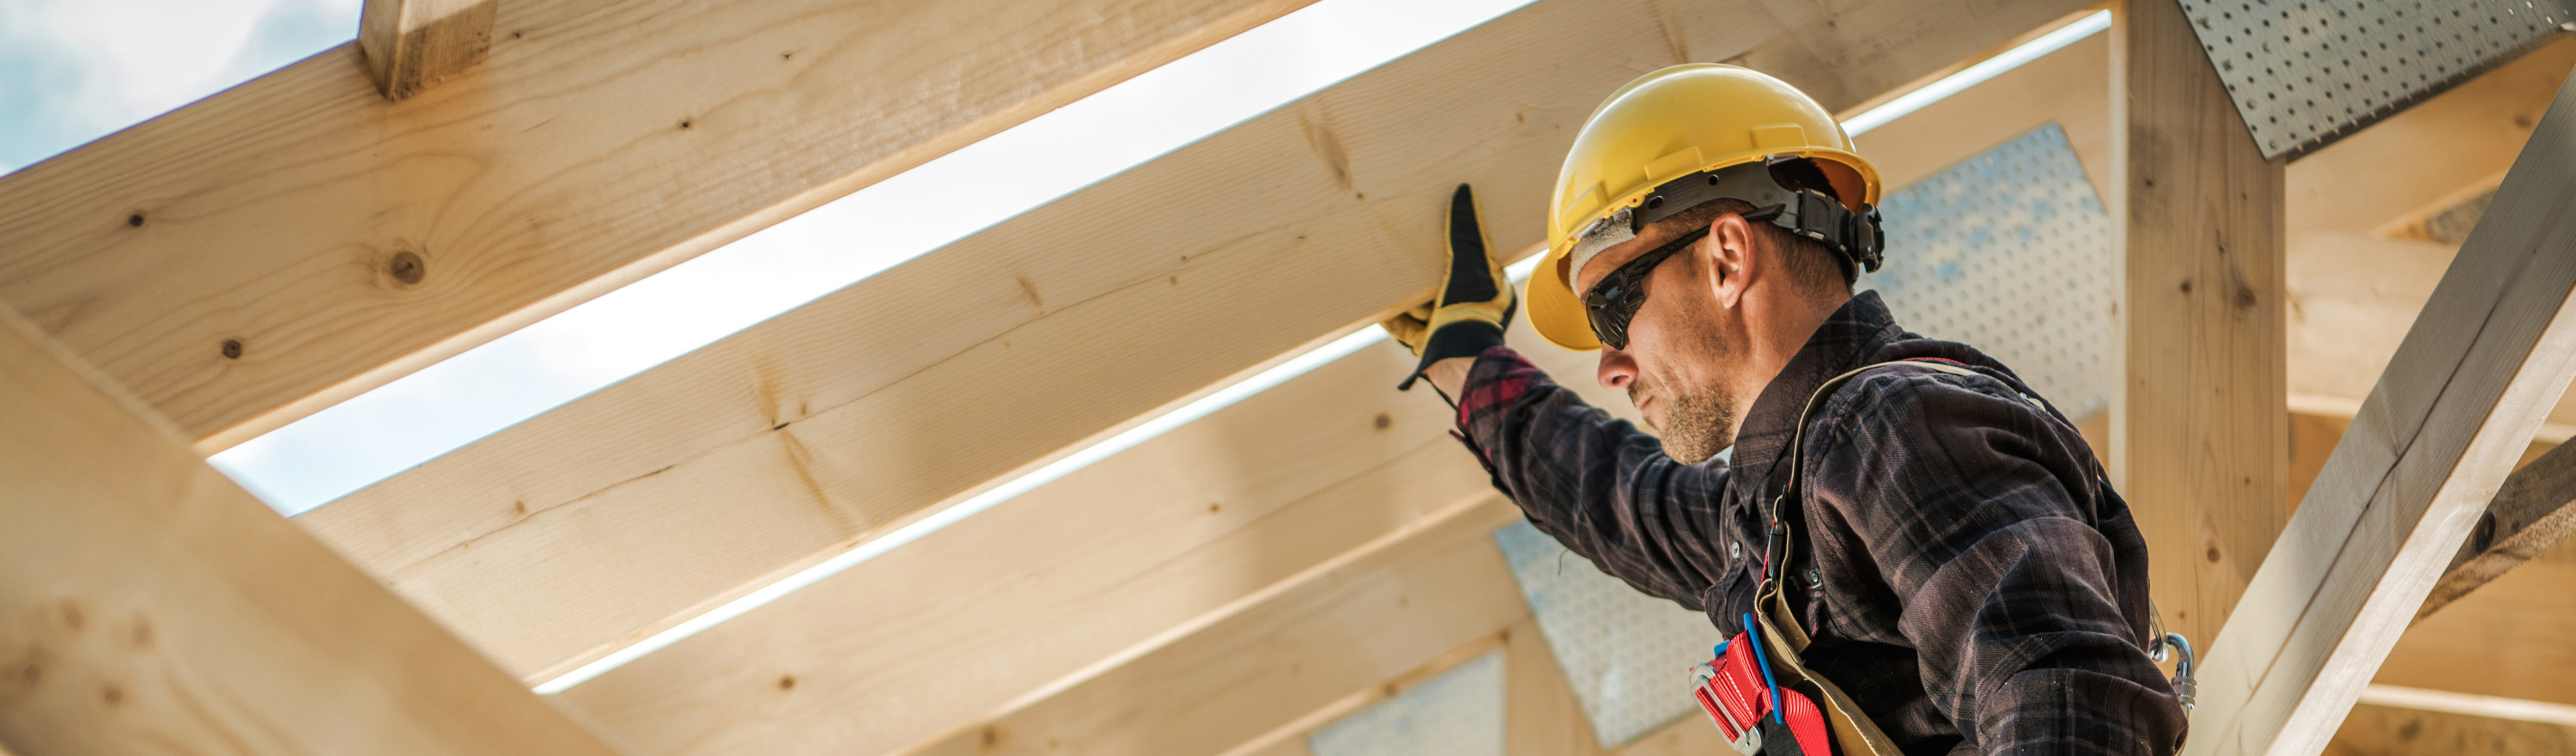 Handyman wearing hard hat fixing rafters of roof needs Tax Relief USA